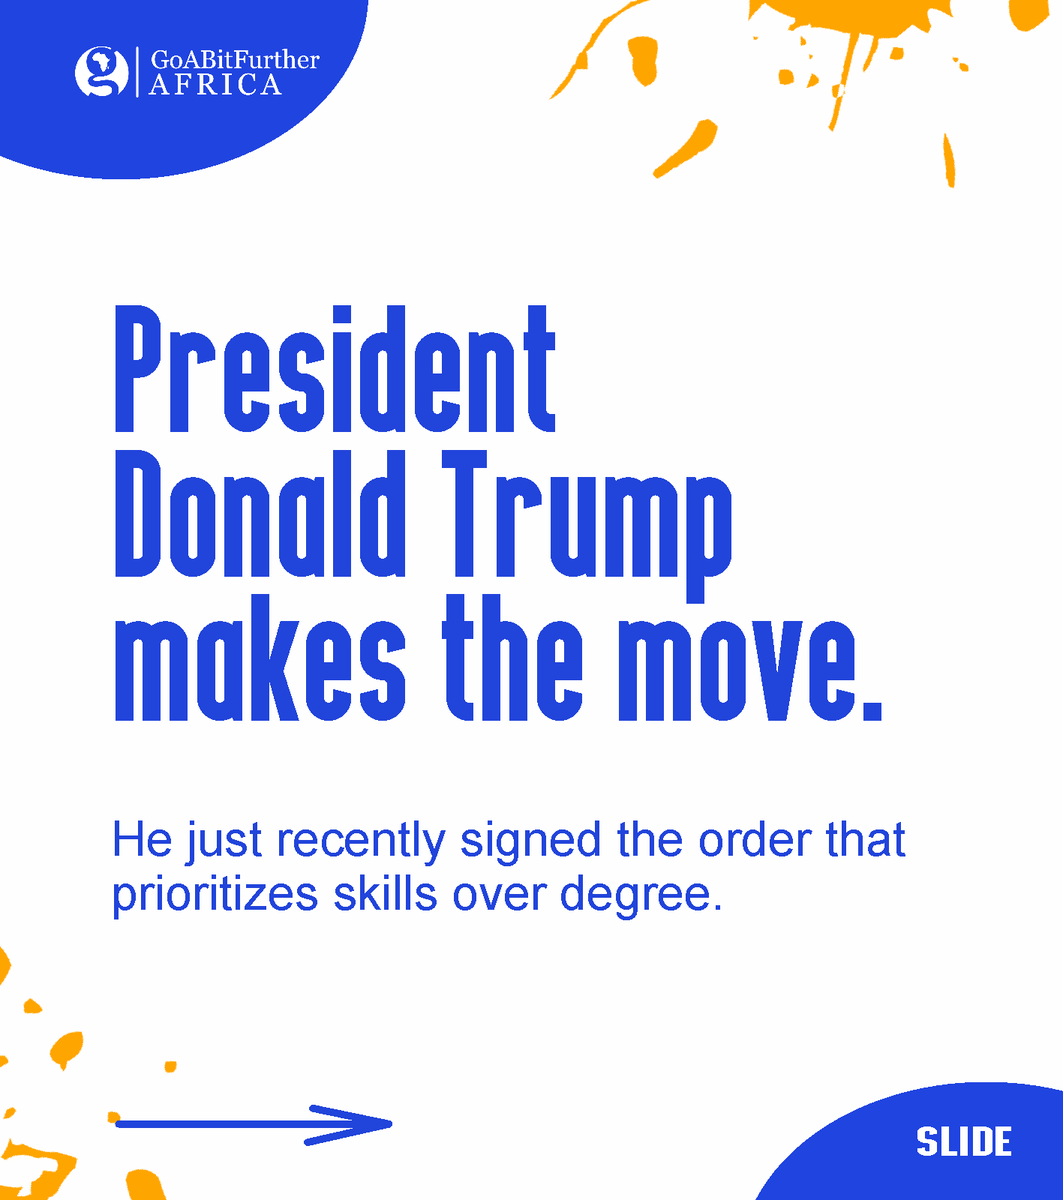 U.S. President Donald Trump makes the move. 
He just recently signed the order that prioritizes skills over college degree. #Thread 
#goabitfurtherafrica #virtualcampustour